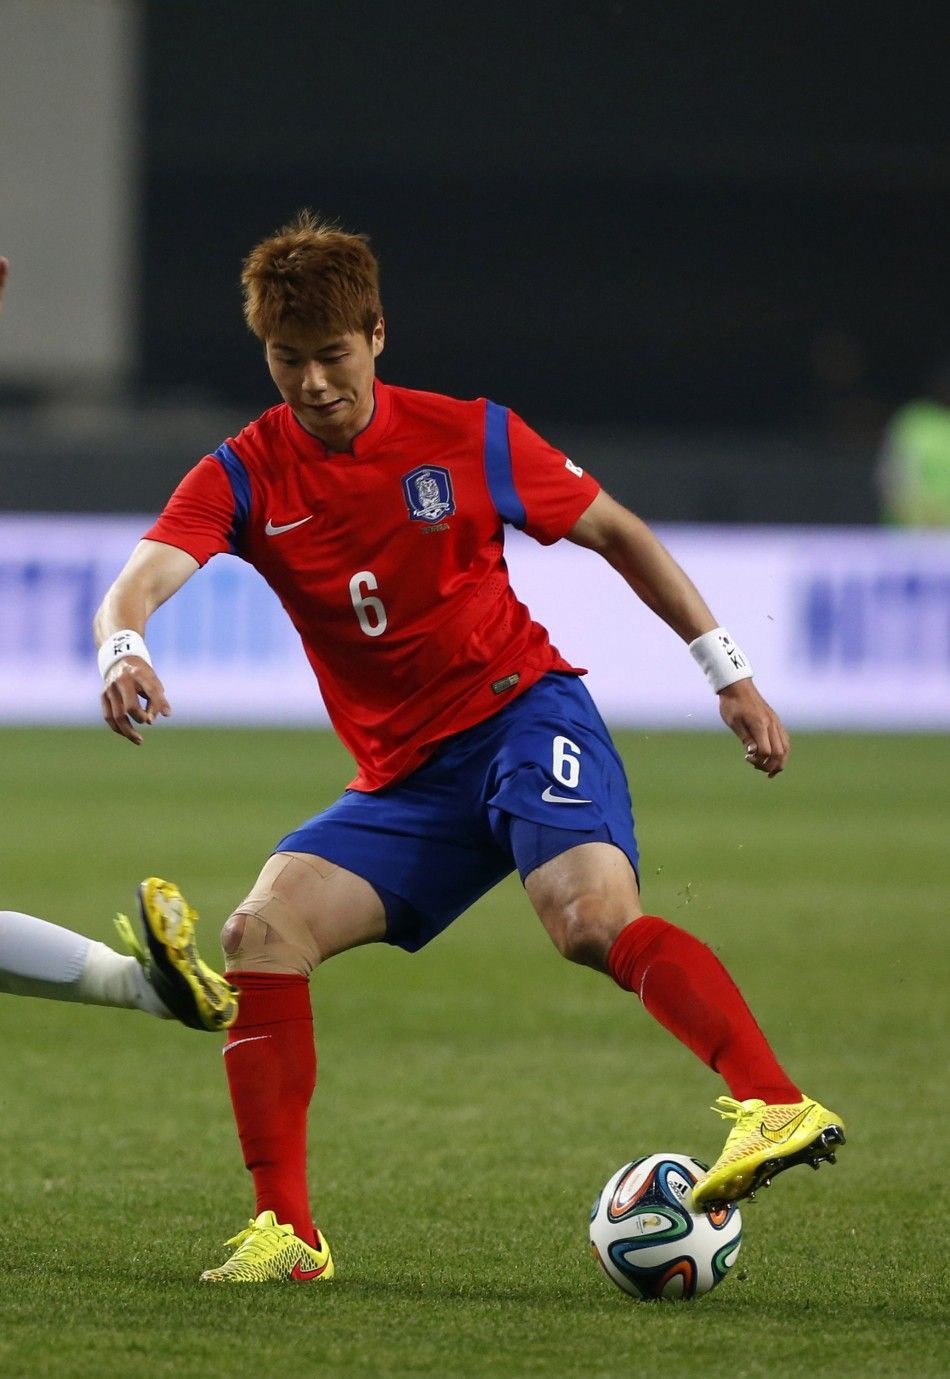 South Koreas Ki Sung-yueng controls the ball during a friendly soccer match against Tunisia at the Seoul World Cup stadium